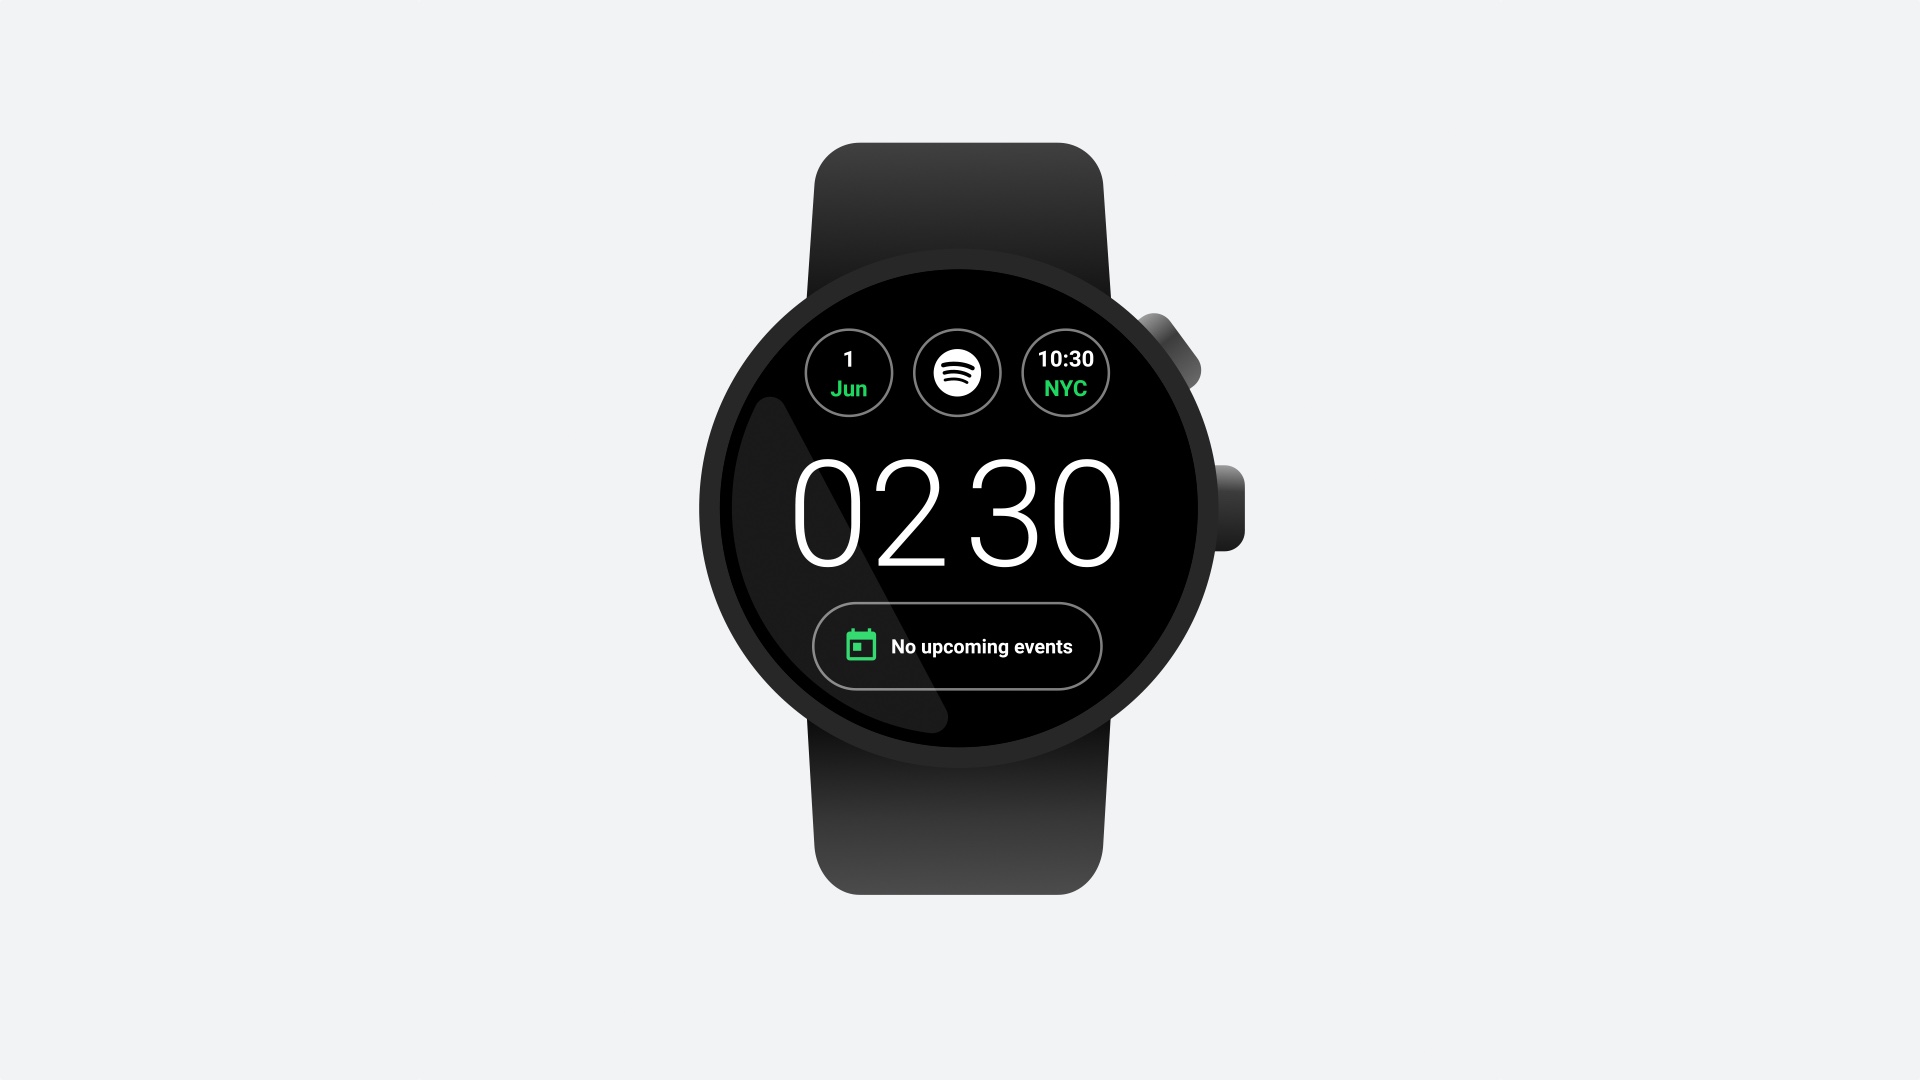 Spotify gets a major upgrade on WearOS with Android's latest feature drop